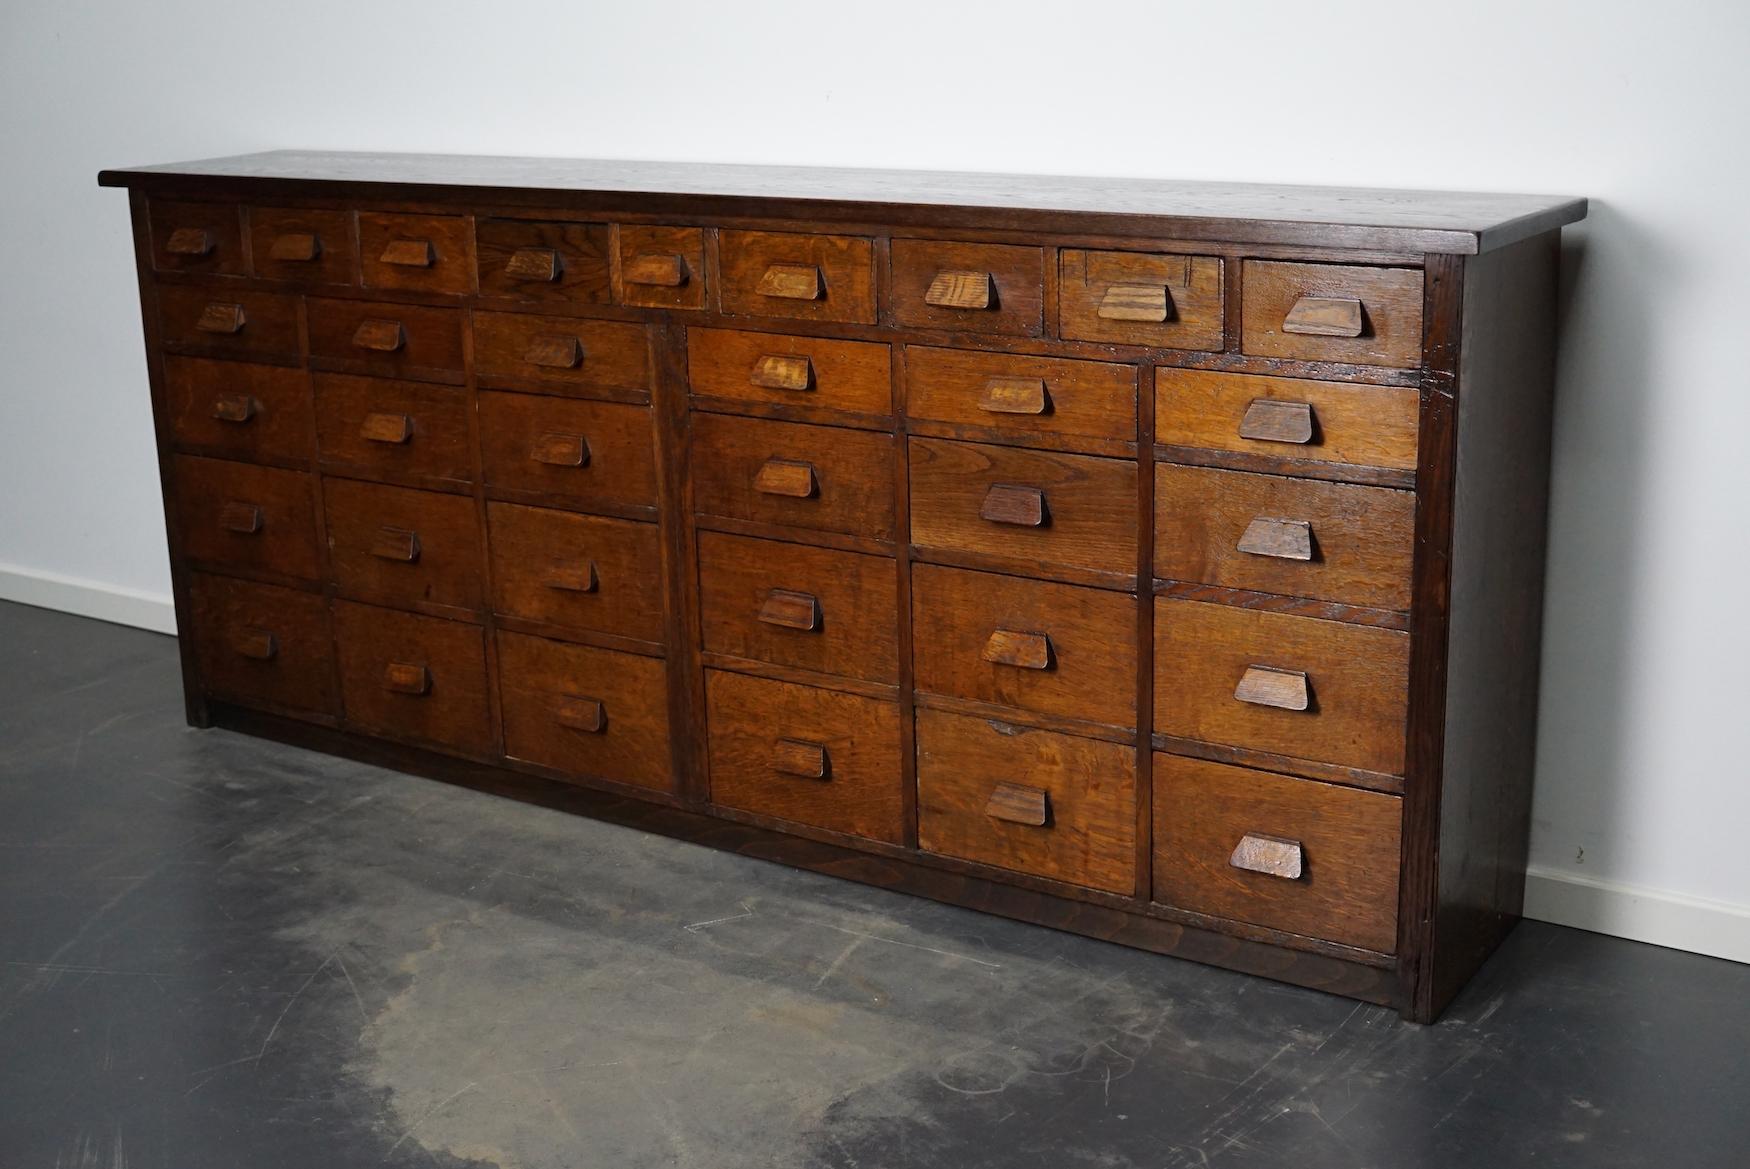 This apothecary cabinet was made circa 1930s in Germany and was later used in a hardware store in Belgium until recently. It features many drawers in different sizes with oak handles.
 